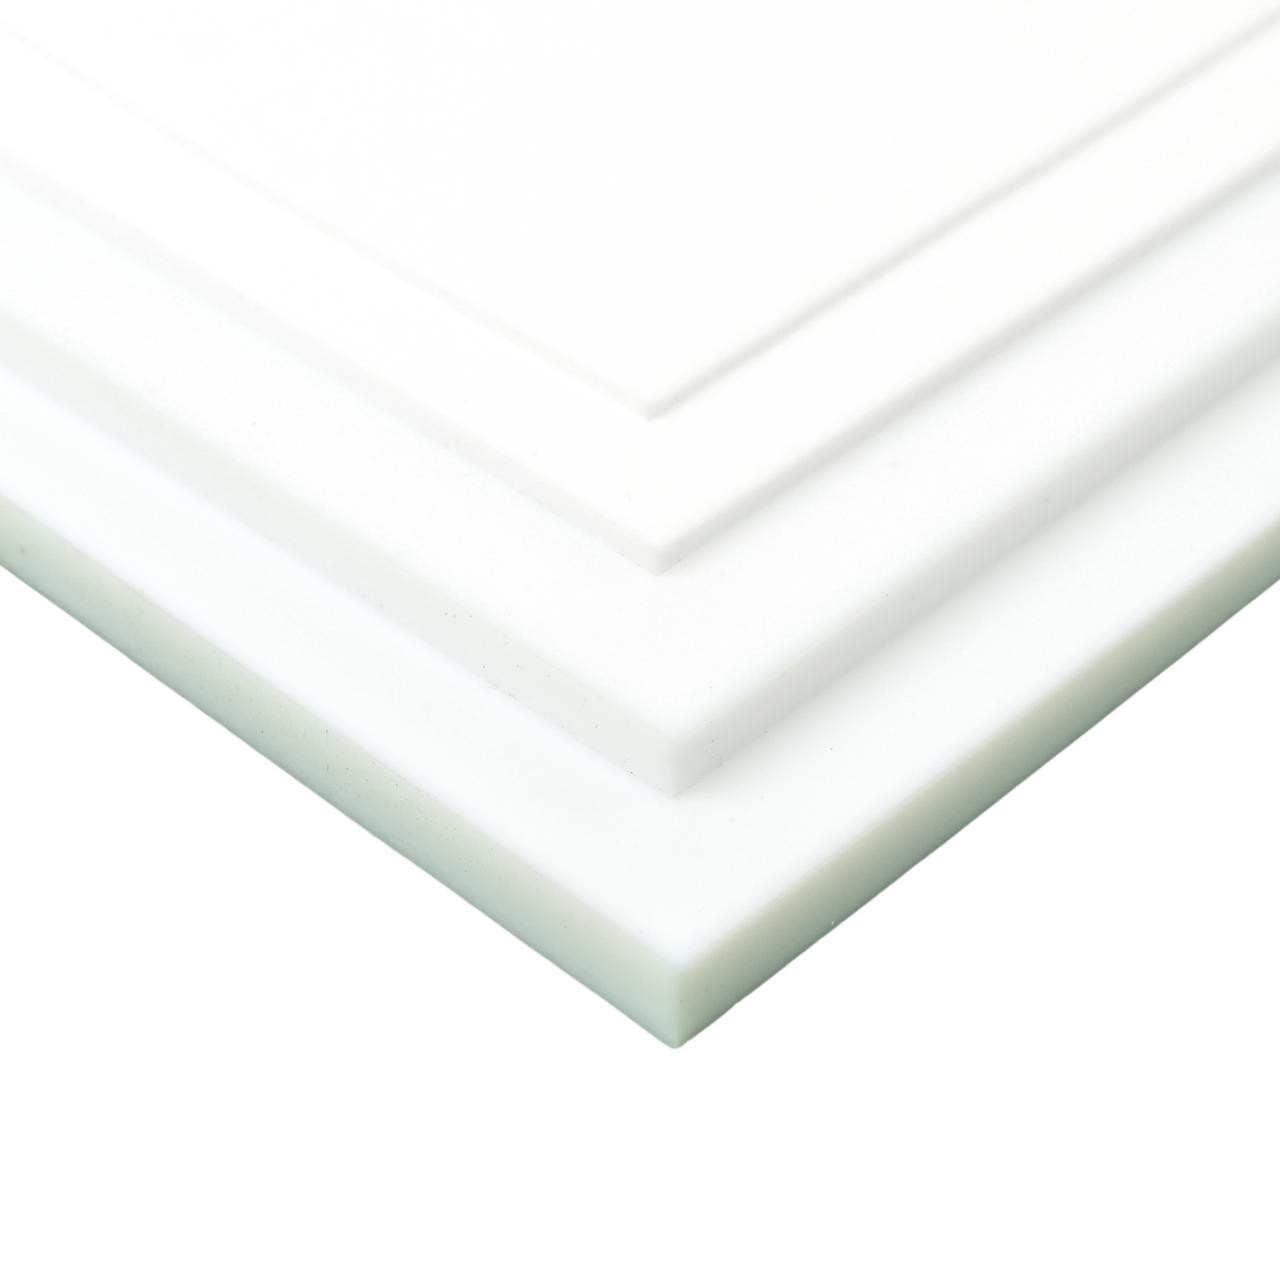 BuyPlastic White (Natural) Teflon PTFE Virgin Plastic Sheet 1/4 inch x 6 inch x 6 inch - Chemical Resistant, Impact Resistant, Size: 6 x 6, Beige